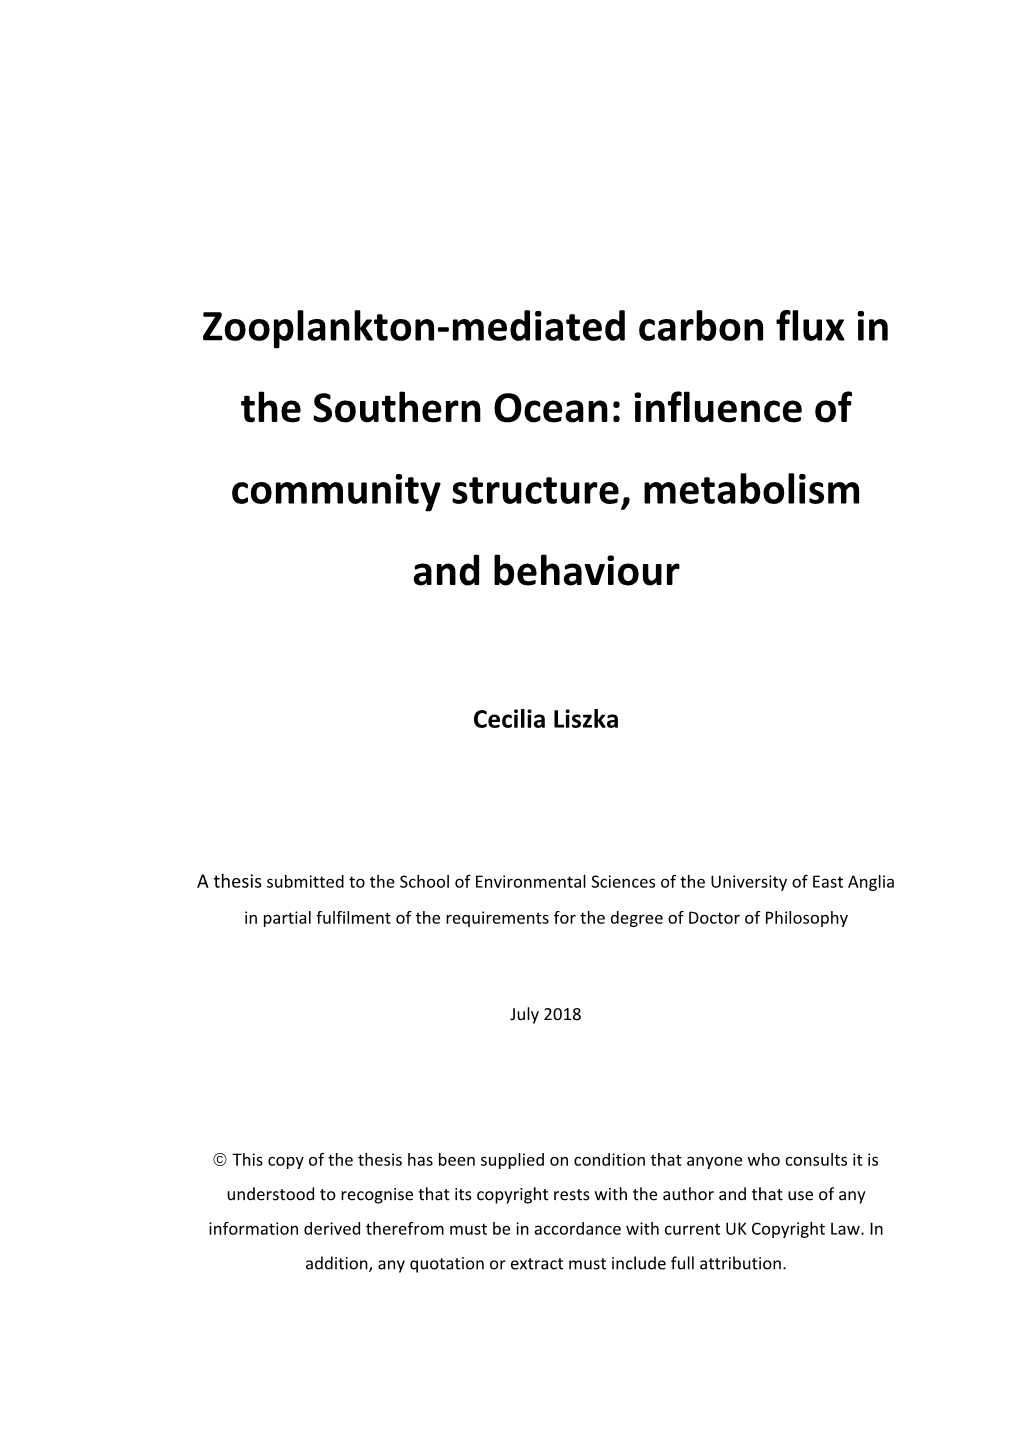 Zooplankton-Mediated Carbon Flux in the Southern Ocean: Influence of Community Structure, Metabolism and Behaviour